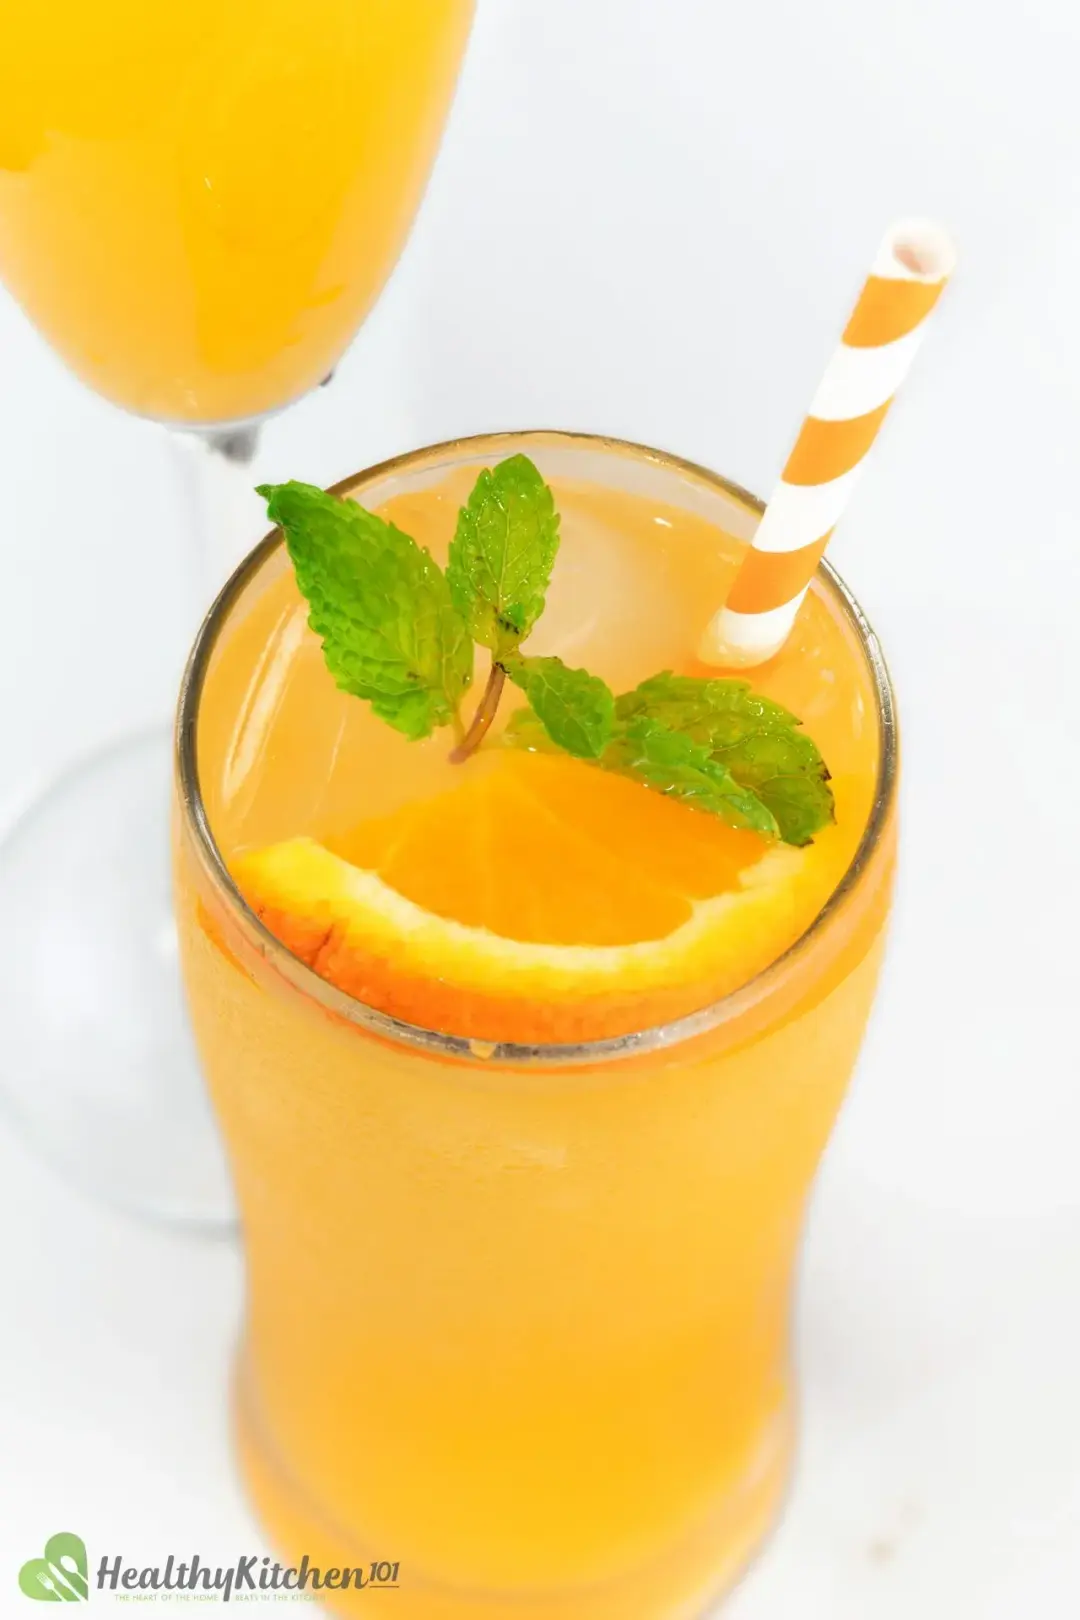 A top view of an orange and ginger ale cocktail glass, garnished with an orange-striped straw, mints, and orange slices